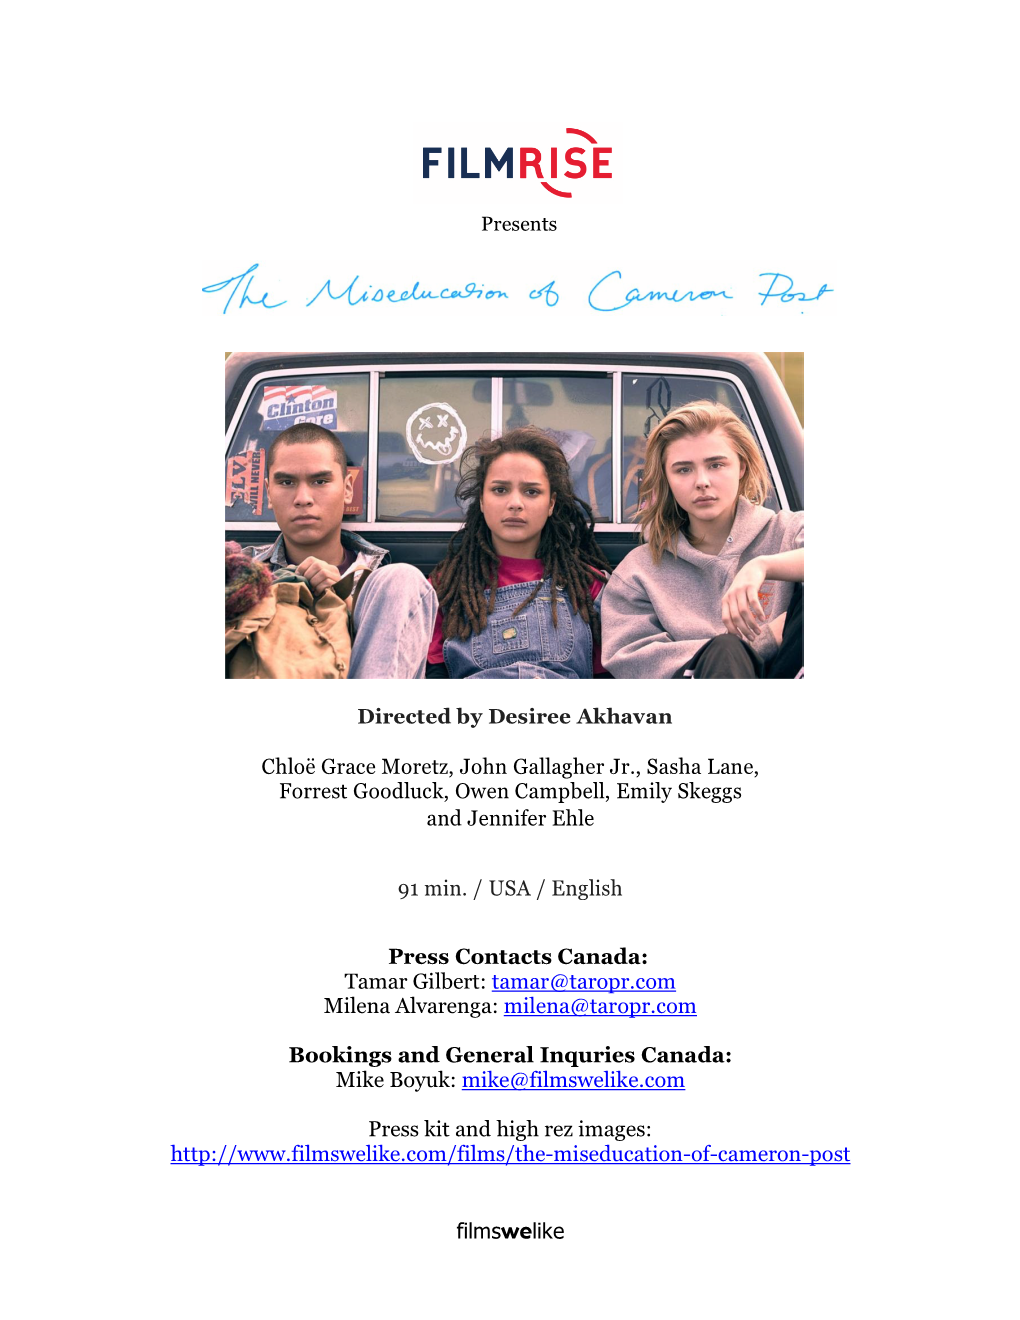 The Miseducation of Cameron Post Press Notes 6.11.18